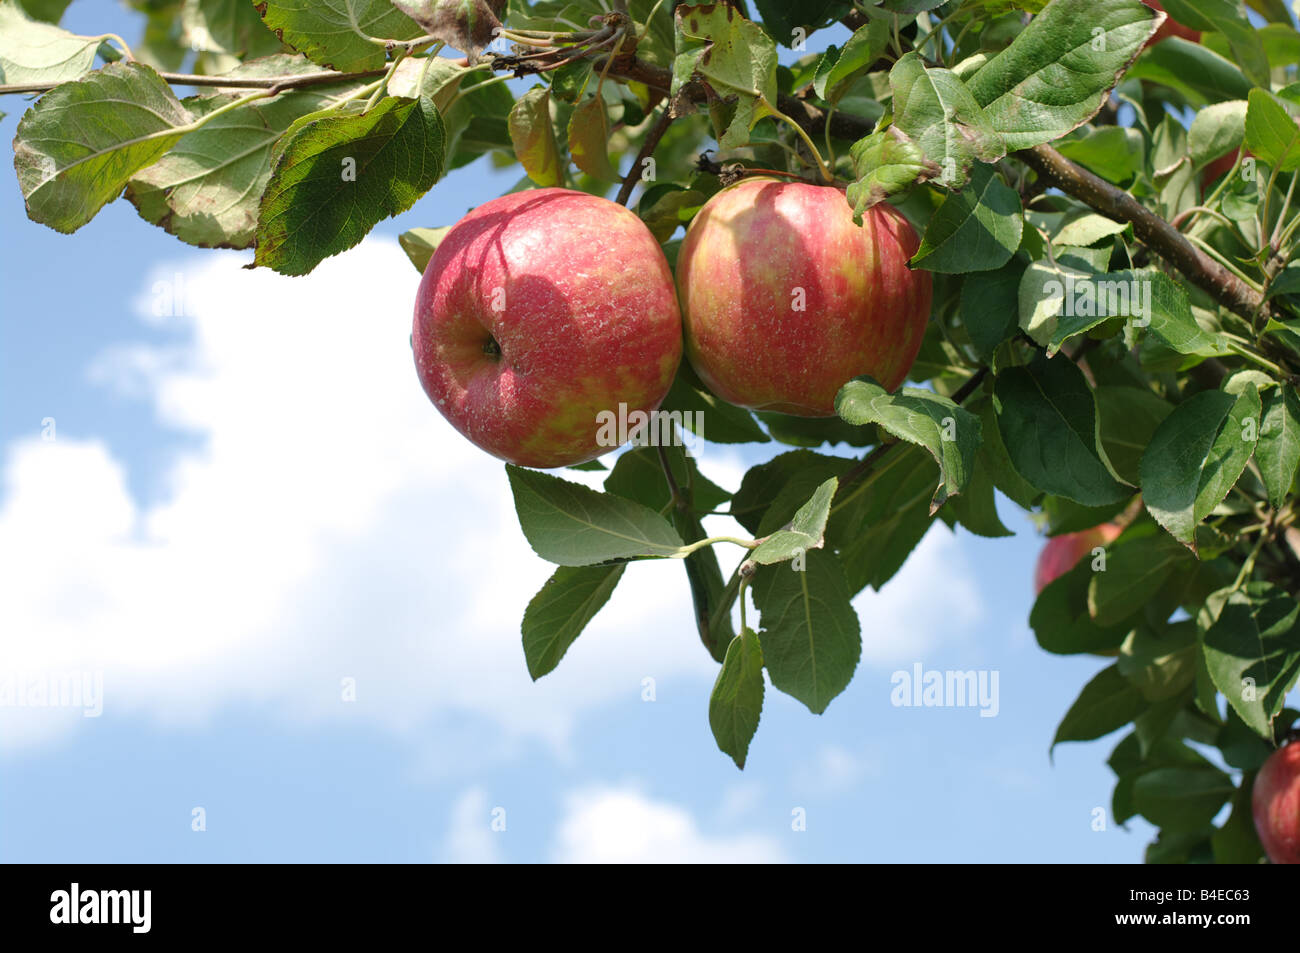 Red apples hanging from the tree branch against blue sky Stock Photo